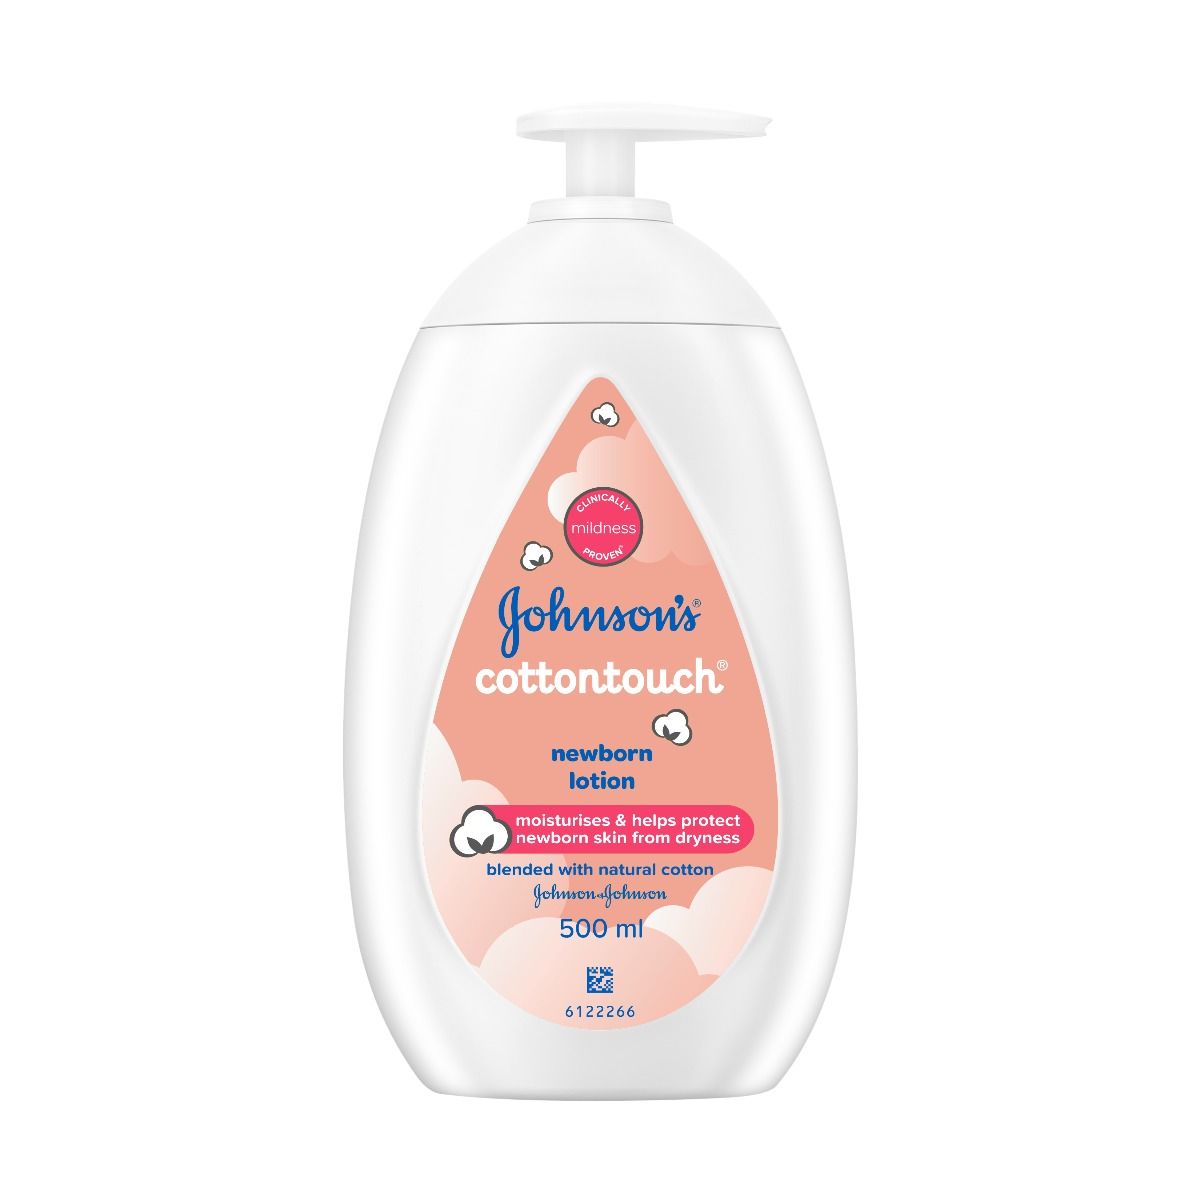 Buy Johnson's Cottontouch New Born Lotion, 500 ml Online